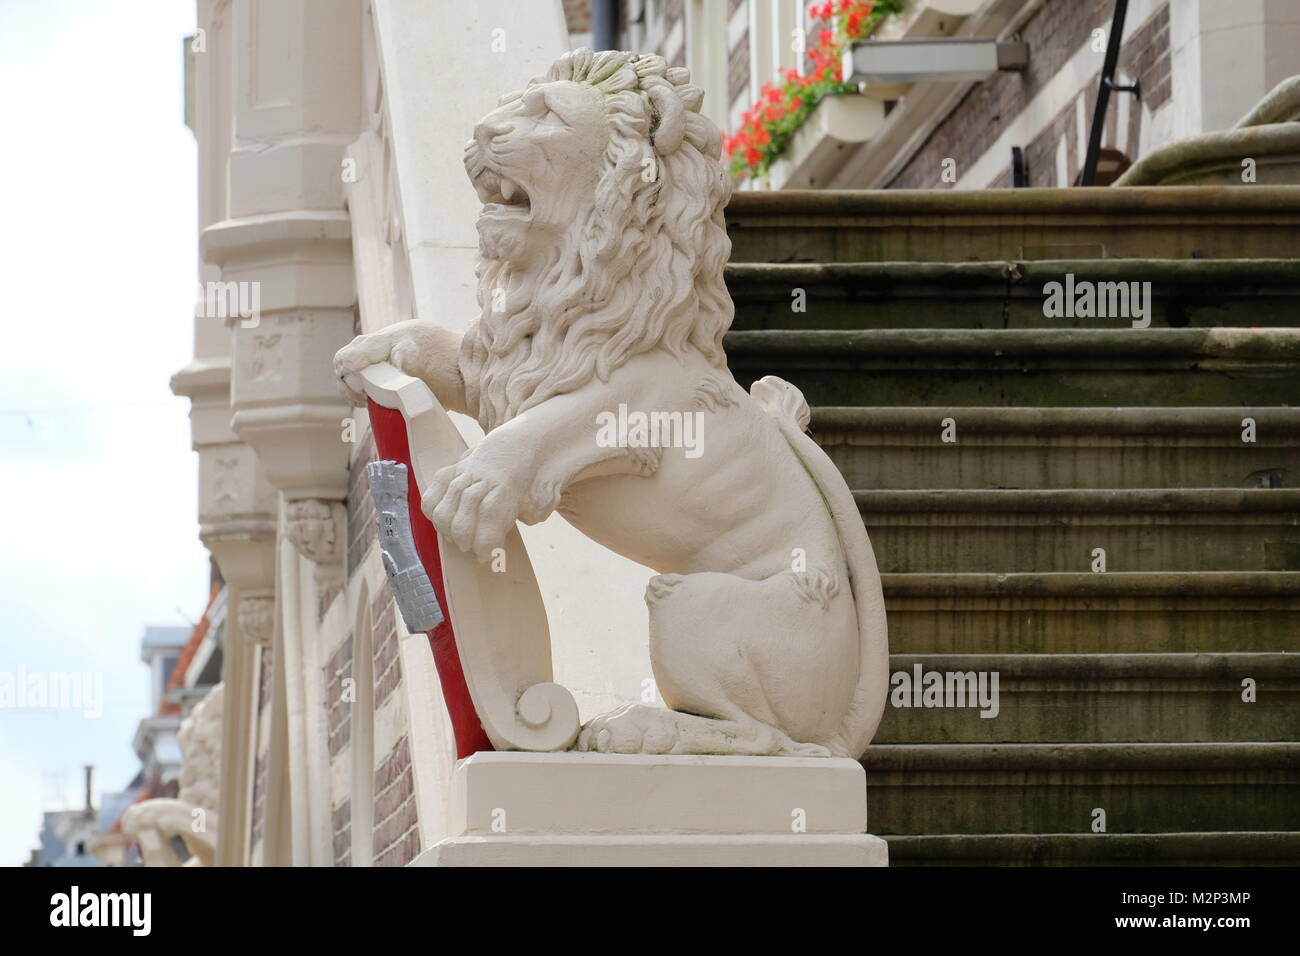 A Lion Guards a Building in Old Town Alkmaar, Home of the Dutch Summer Cheese Market Stock Photo